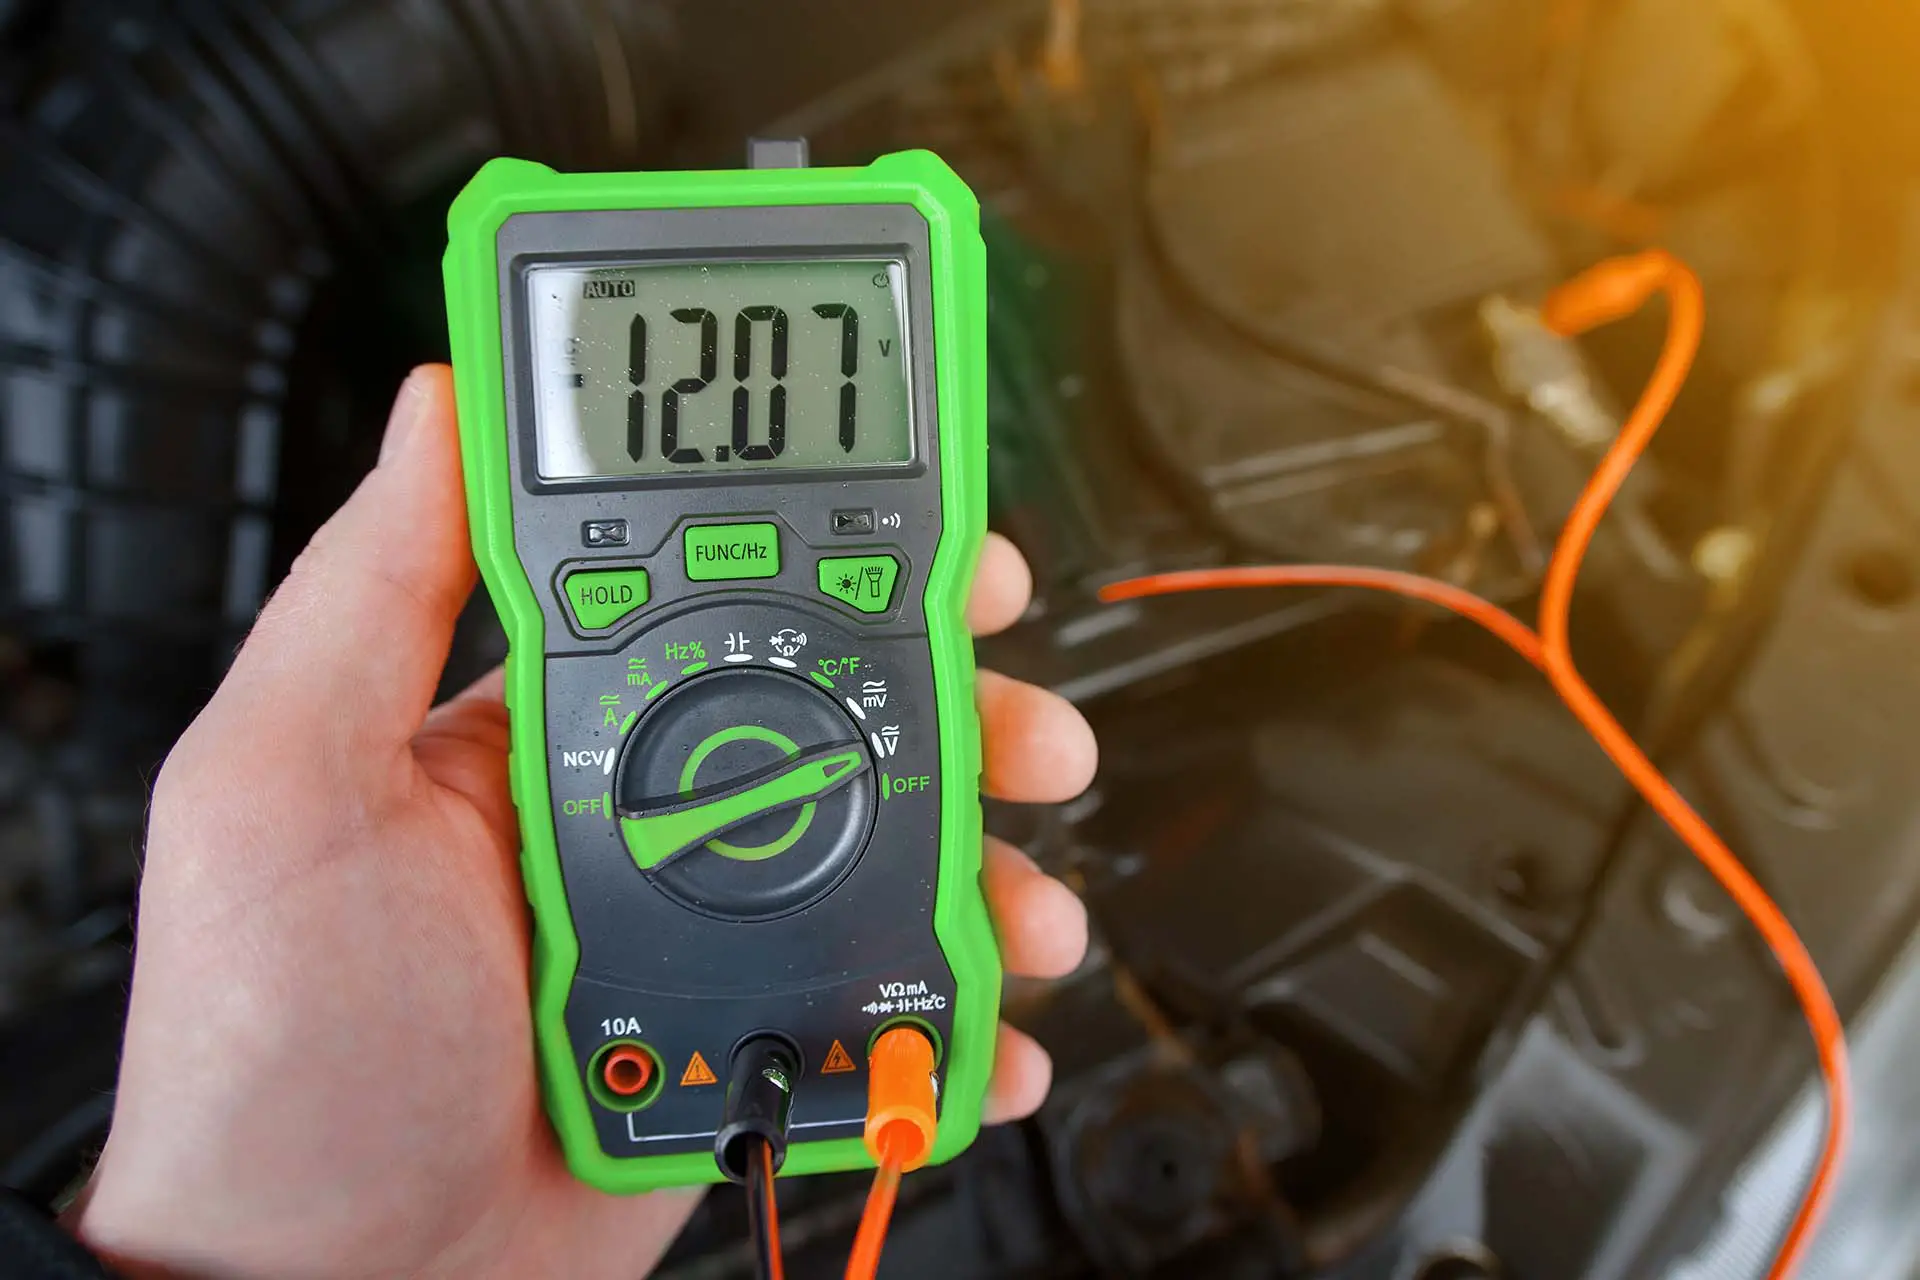 Checking car battery with digital multimeter. Check car battery using voltmeter. Man check up voltage level, alternator produce 12.07 volts. Bad alternator won't sufficiently charge the battery